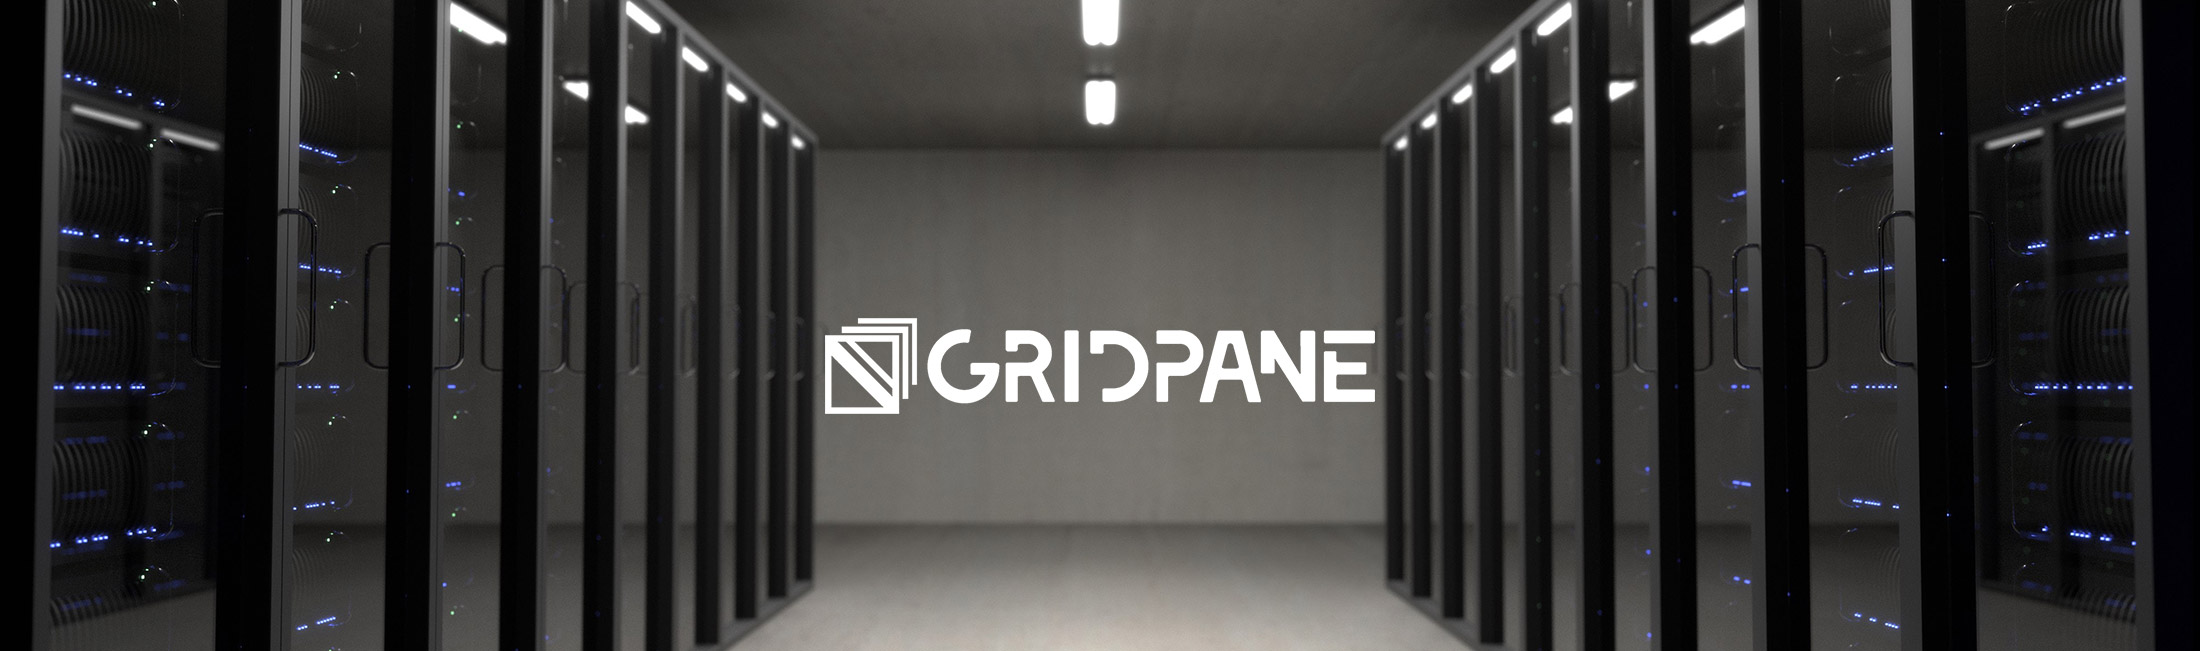 Getting Started with Gridpane